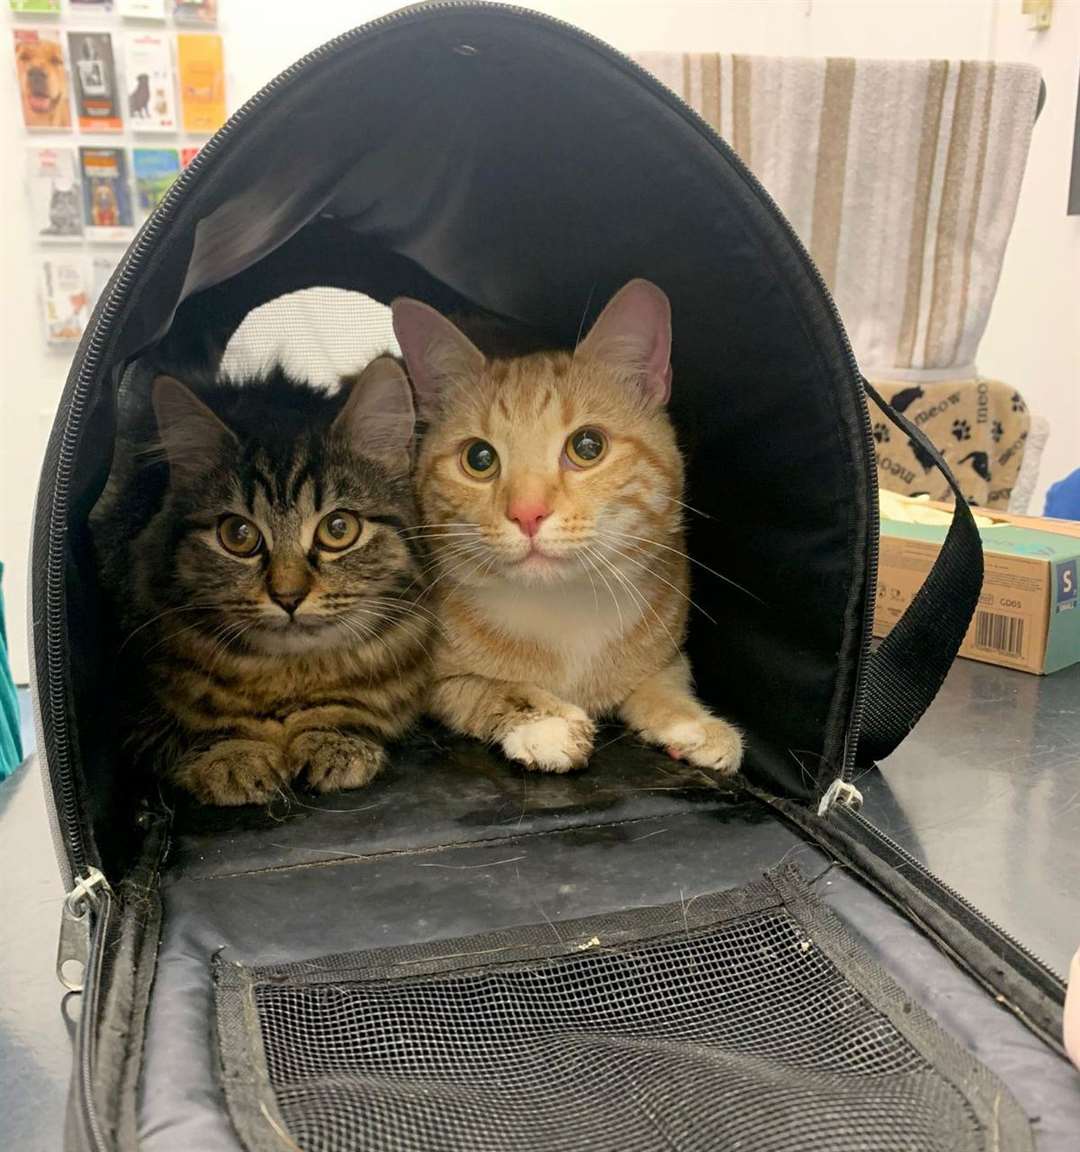 Two cats were found dumped in a carrier by the side of the road in Swanscombe. Picture: RSPCA